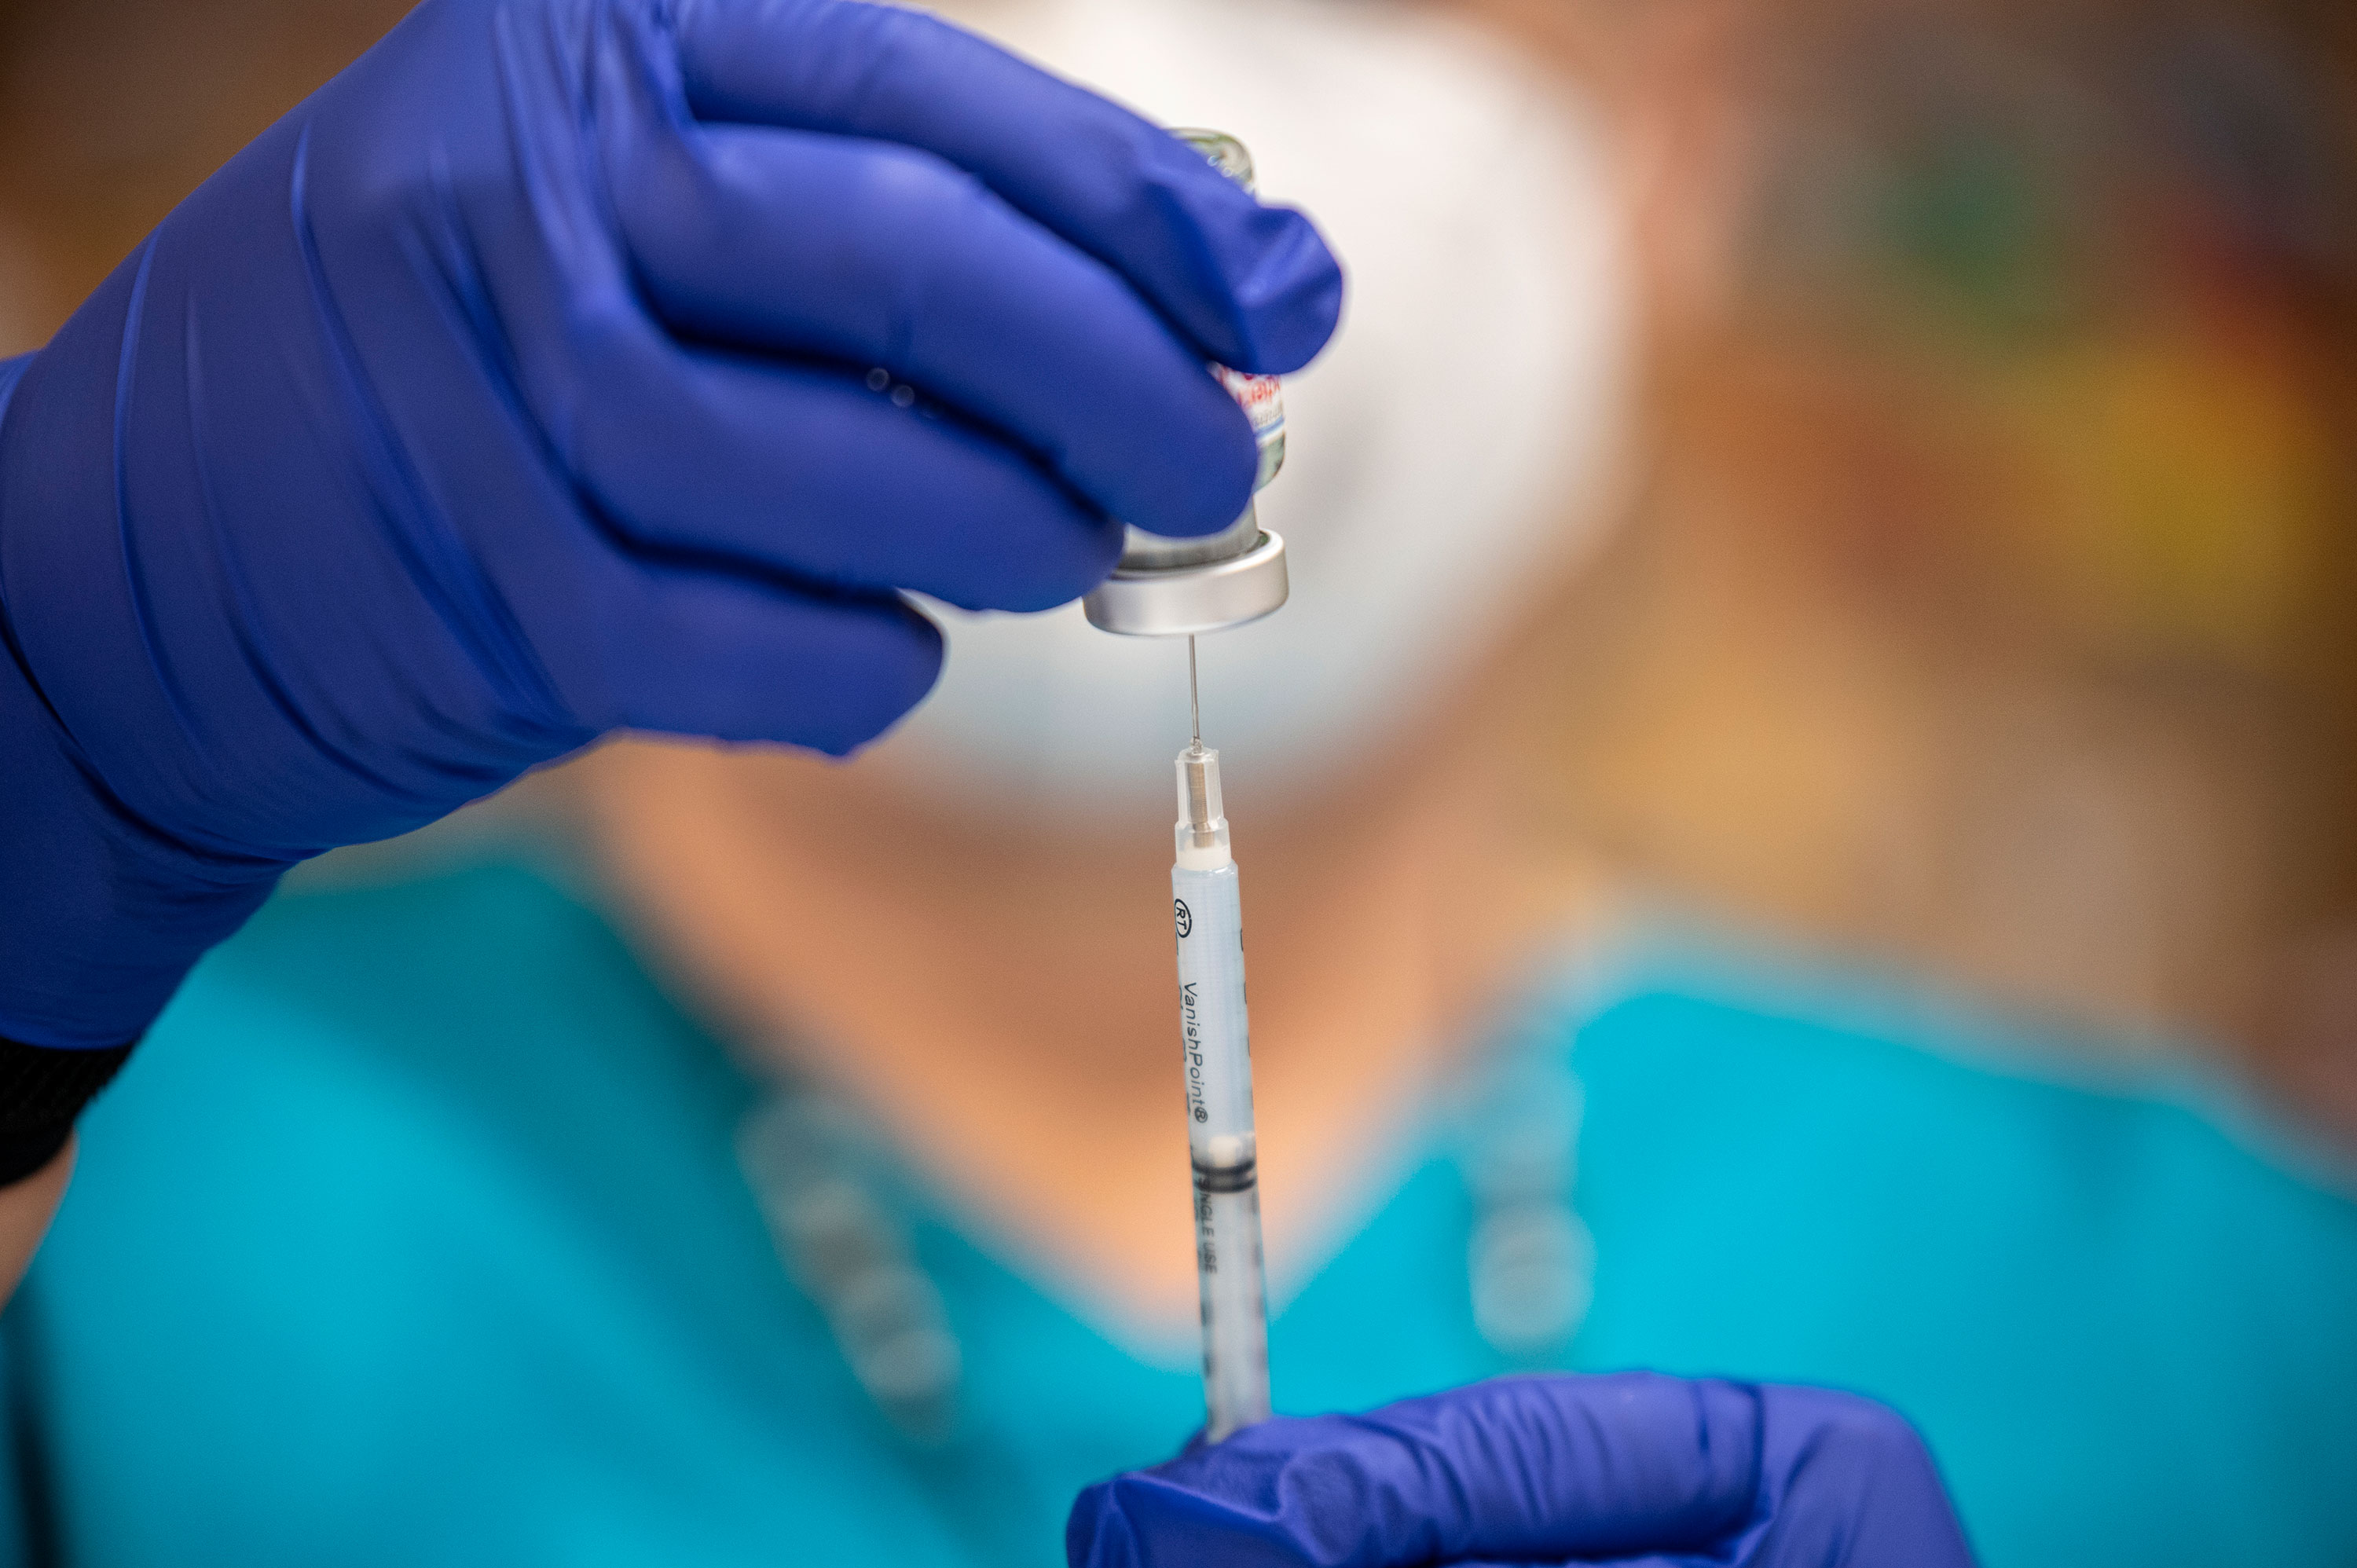 A nurse fills a syringe with the Moderna Covid-19 vaccine at a vaccination site in San Antonio, Texas, on March 29.